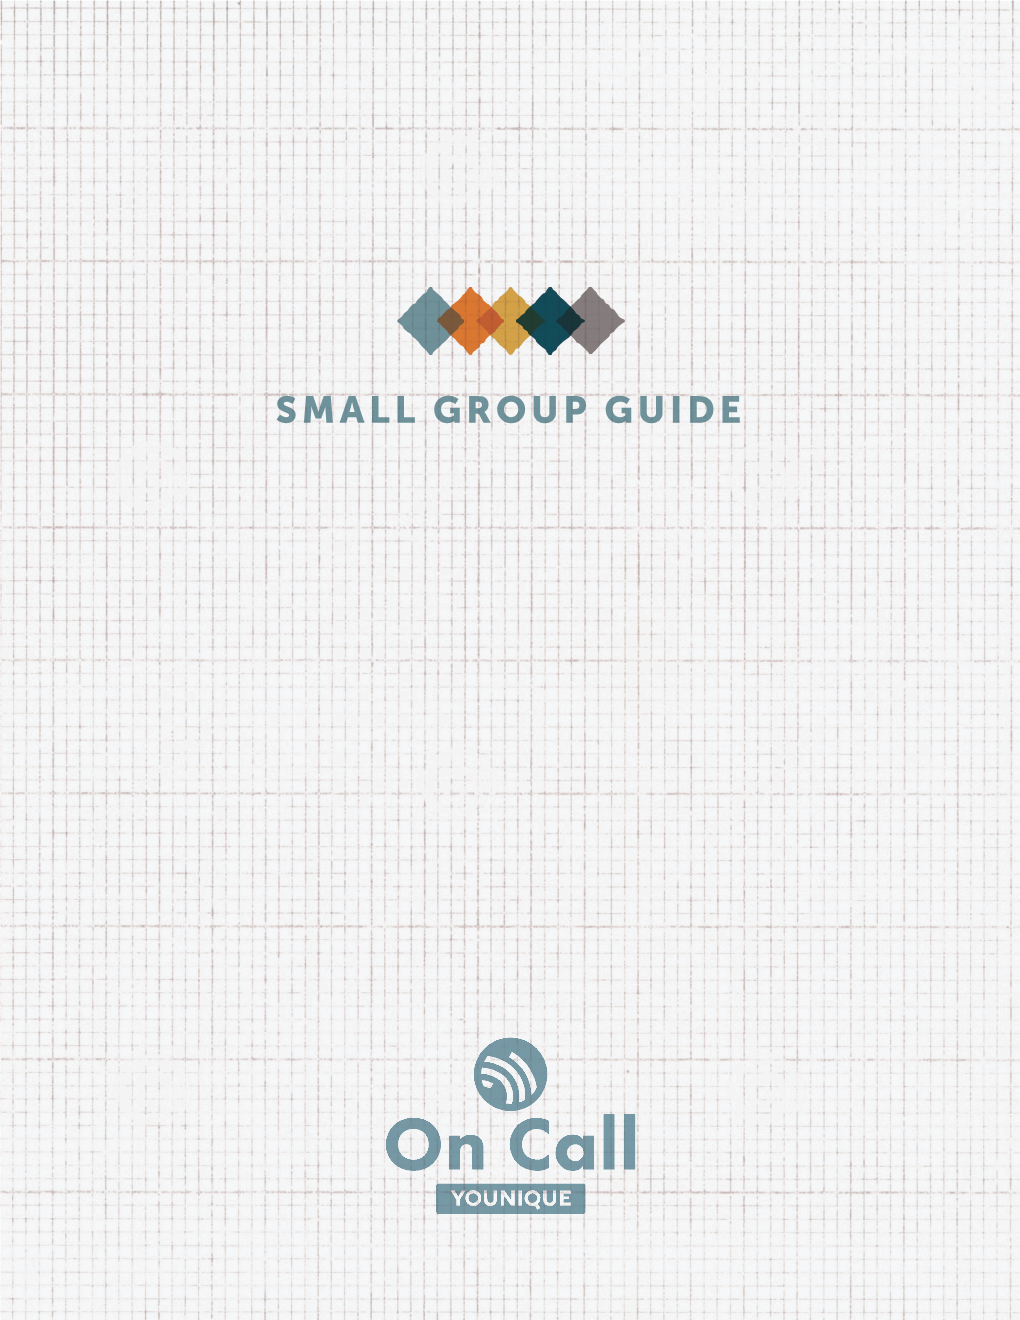 SMALL GROUP GUIDE 2 - Small Group Guide